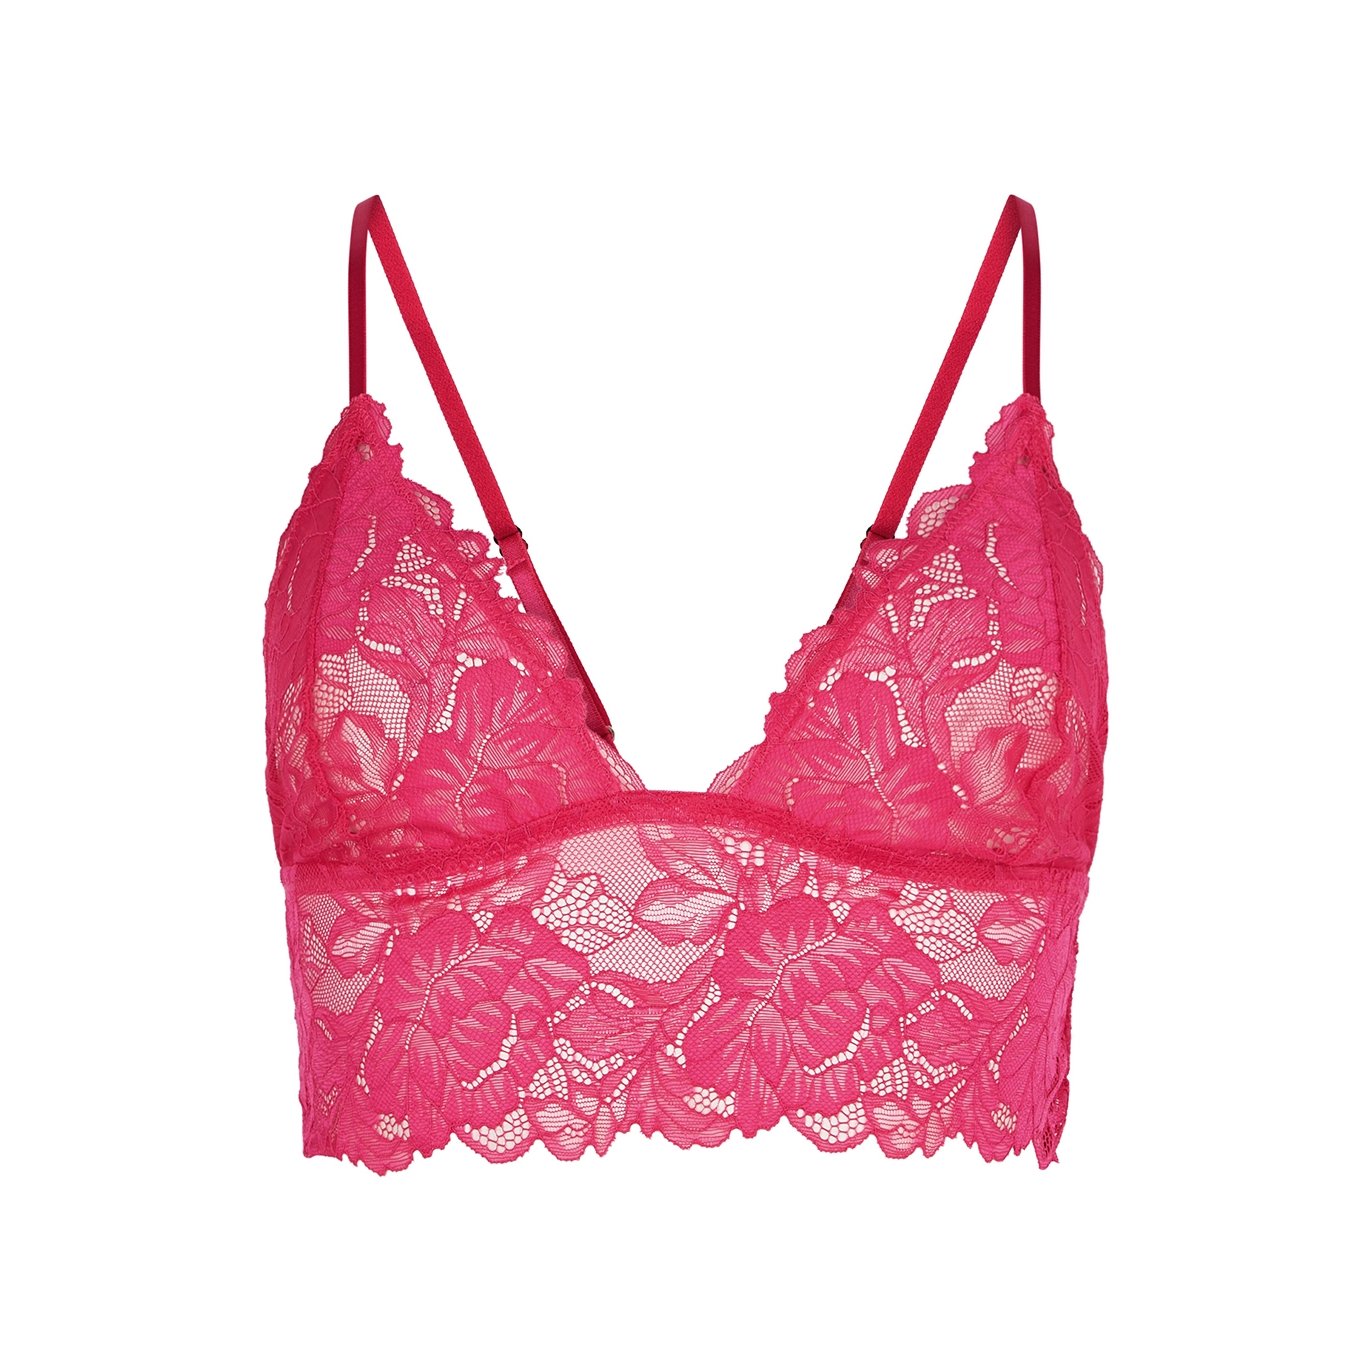 Free People Everyday Pink Lace Bra Top - S